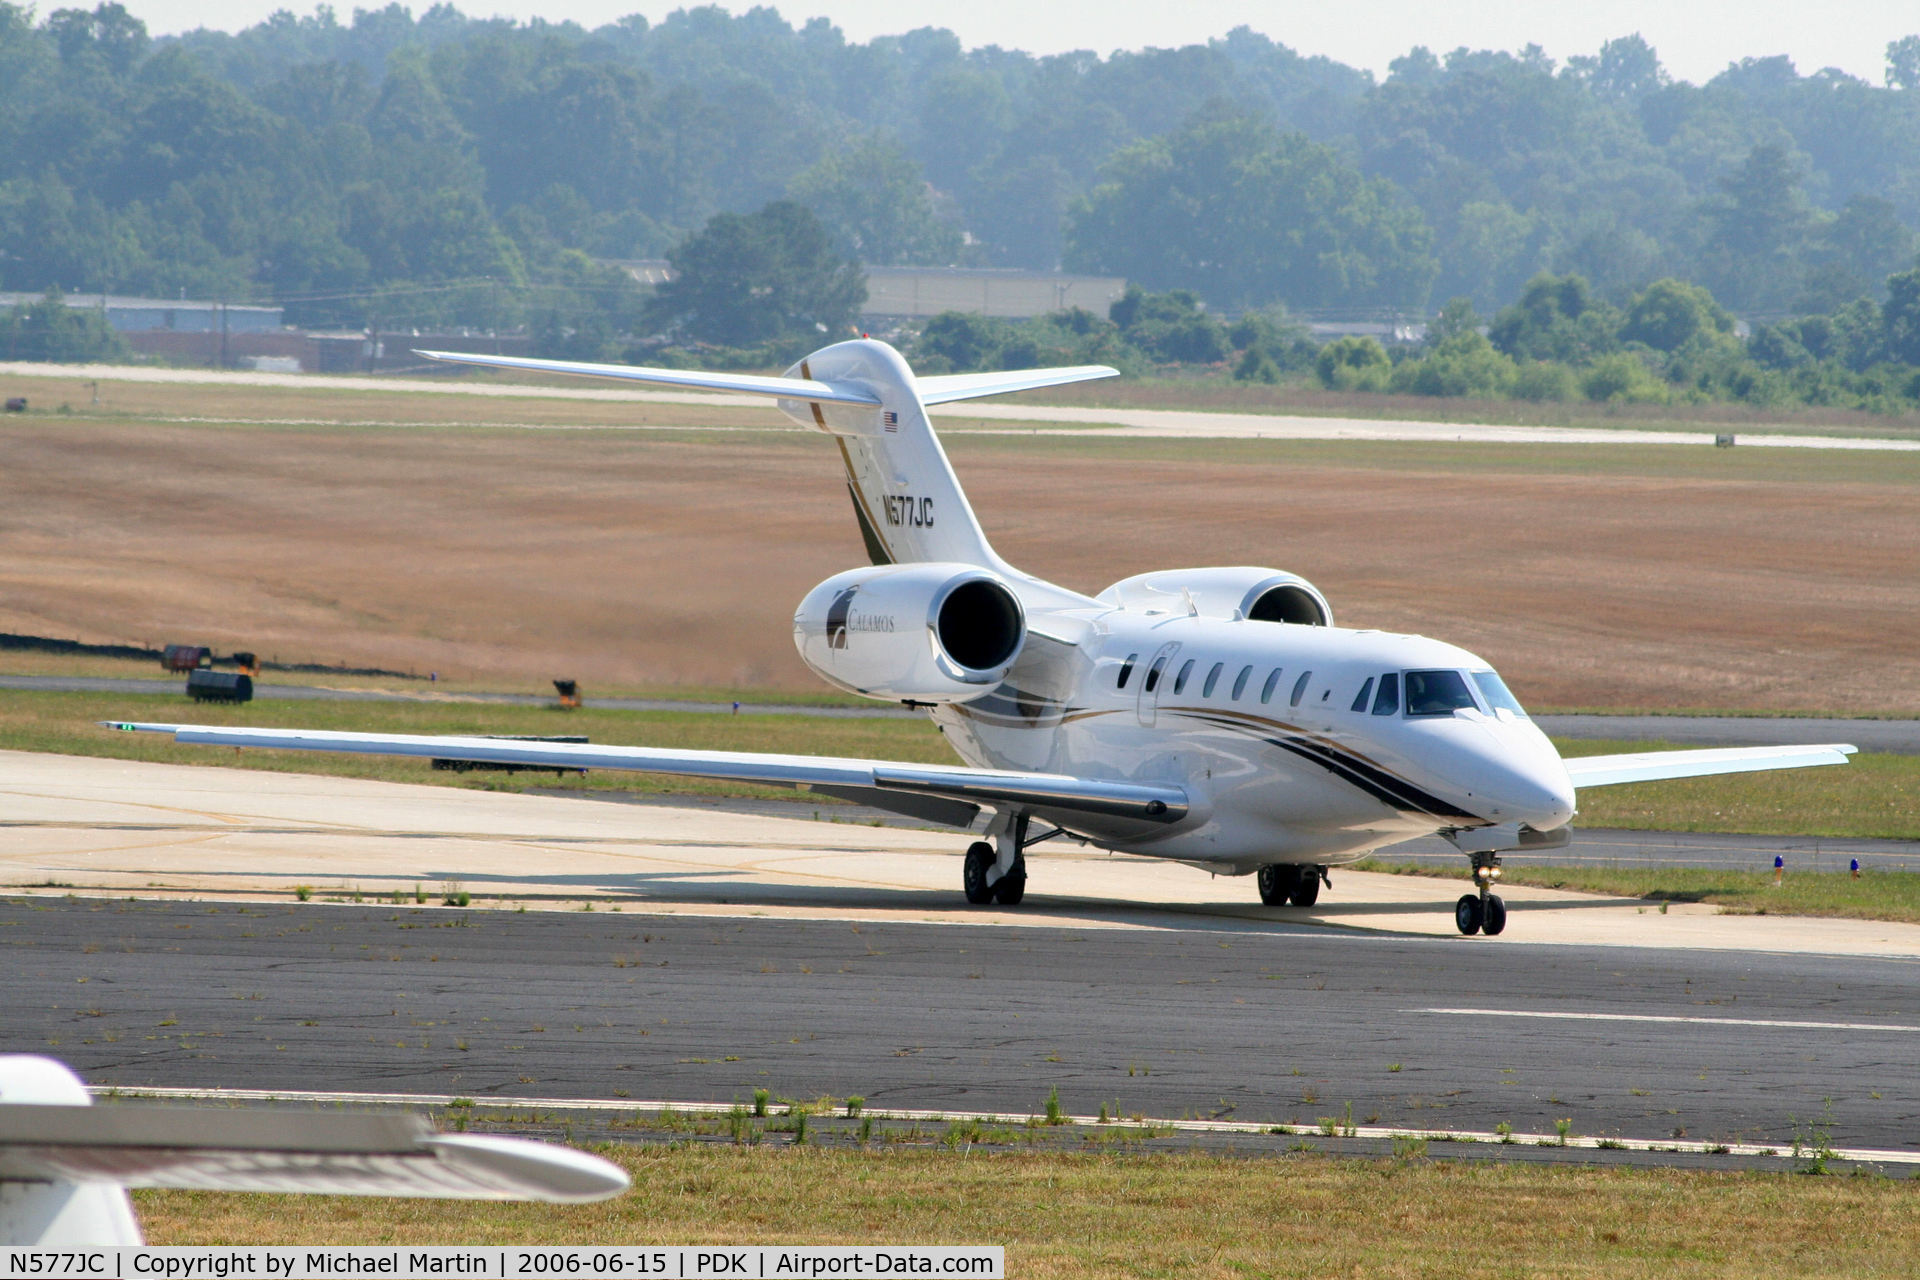 N577JC, 2000 Cessna 750 Citation X Citation X C/N 750-0122, Taxing from Signature Air